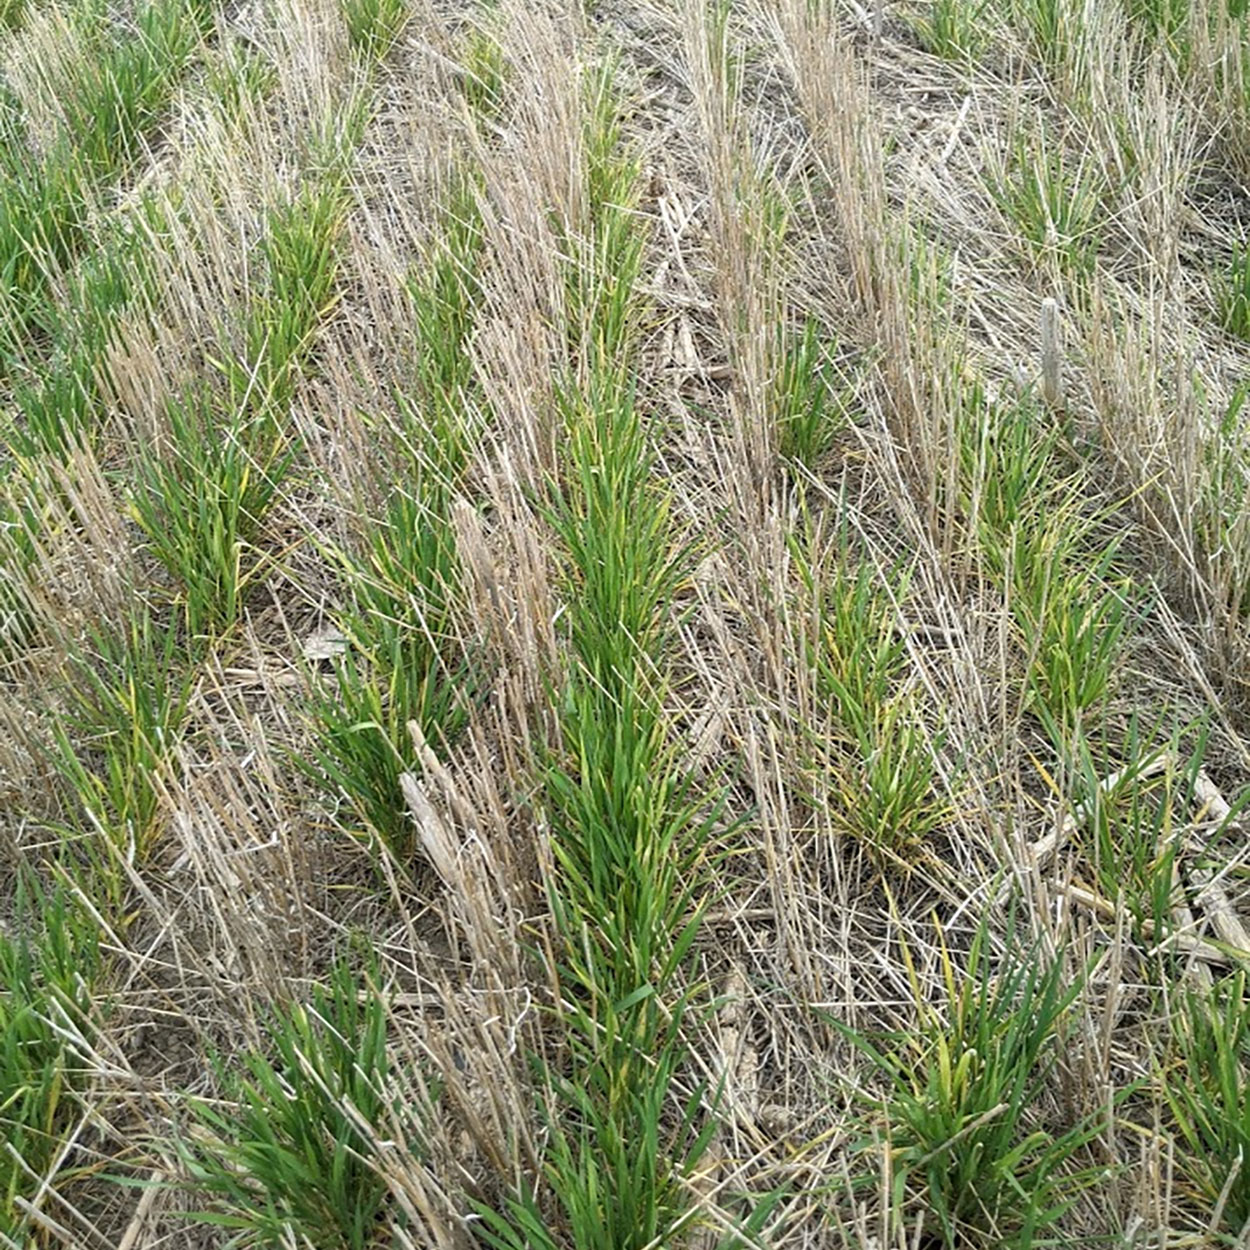 Winter wheat plants at the tillering growth stage with leaves yellowing as a result of wheat streak mosaic virus infection.